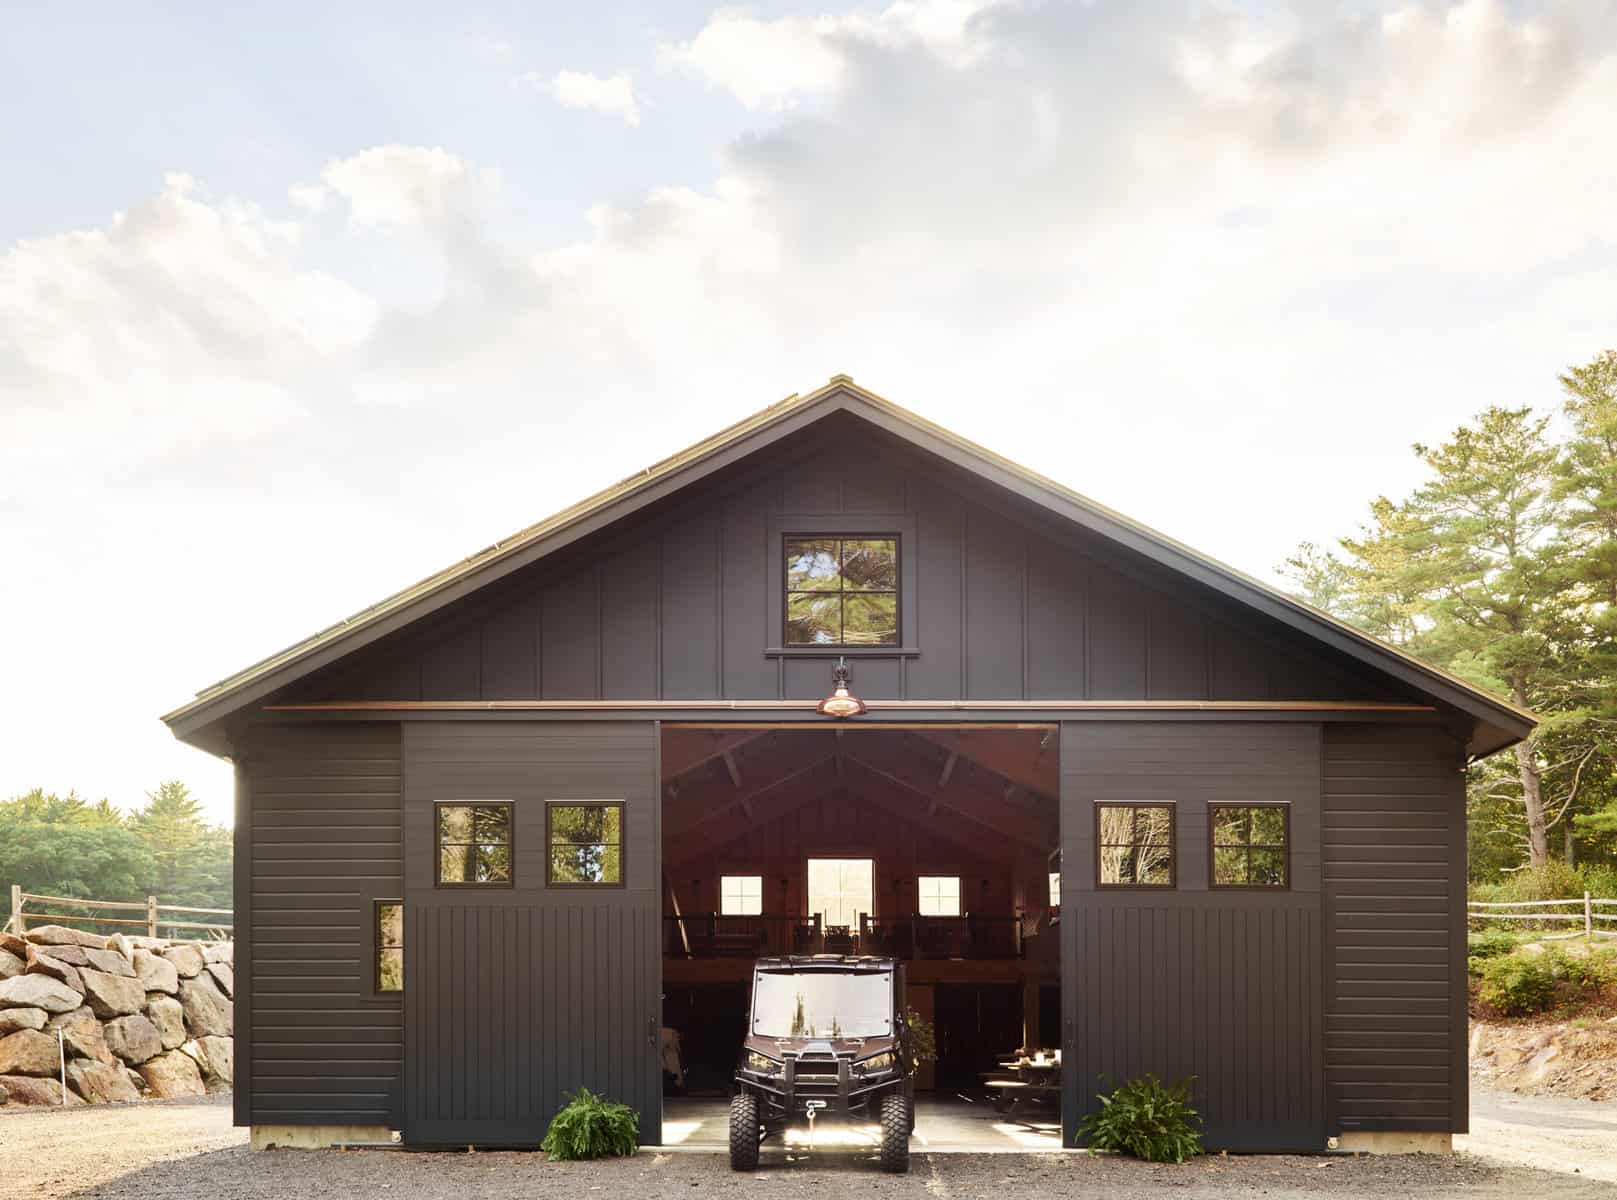 Netzero Barn for Parties and Storage